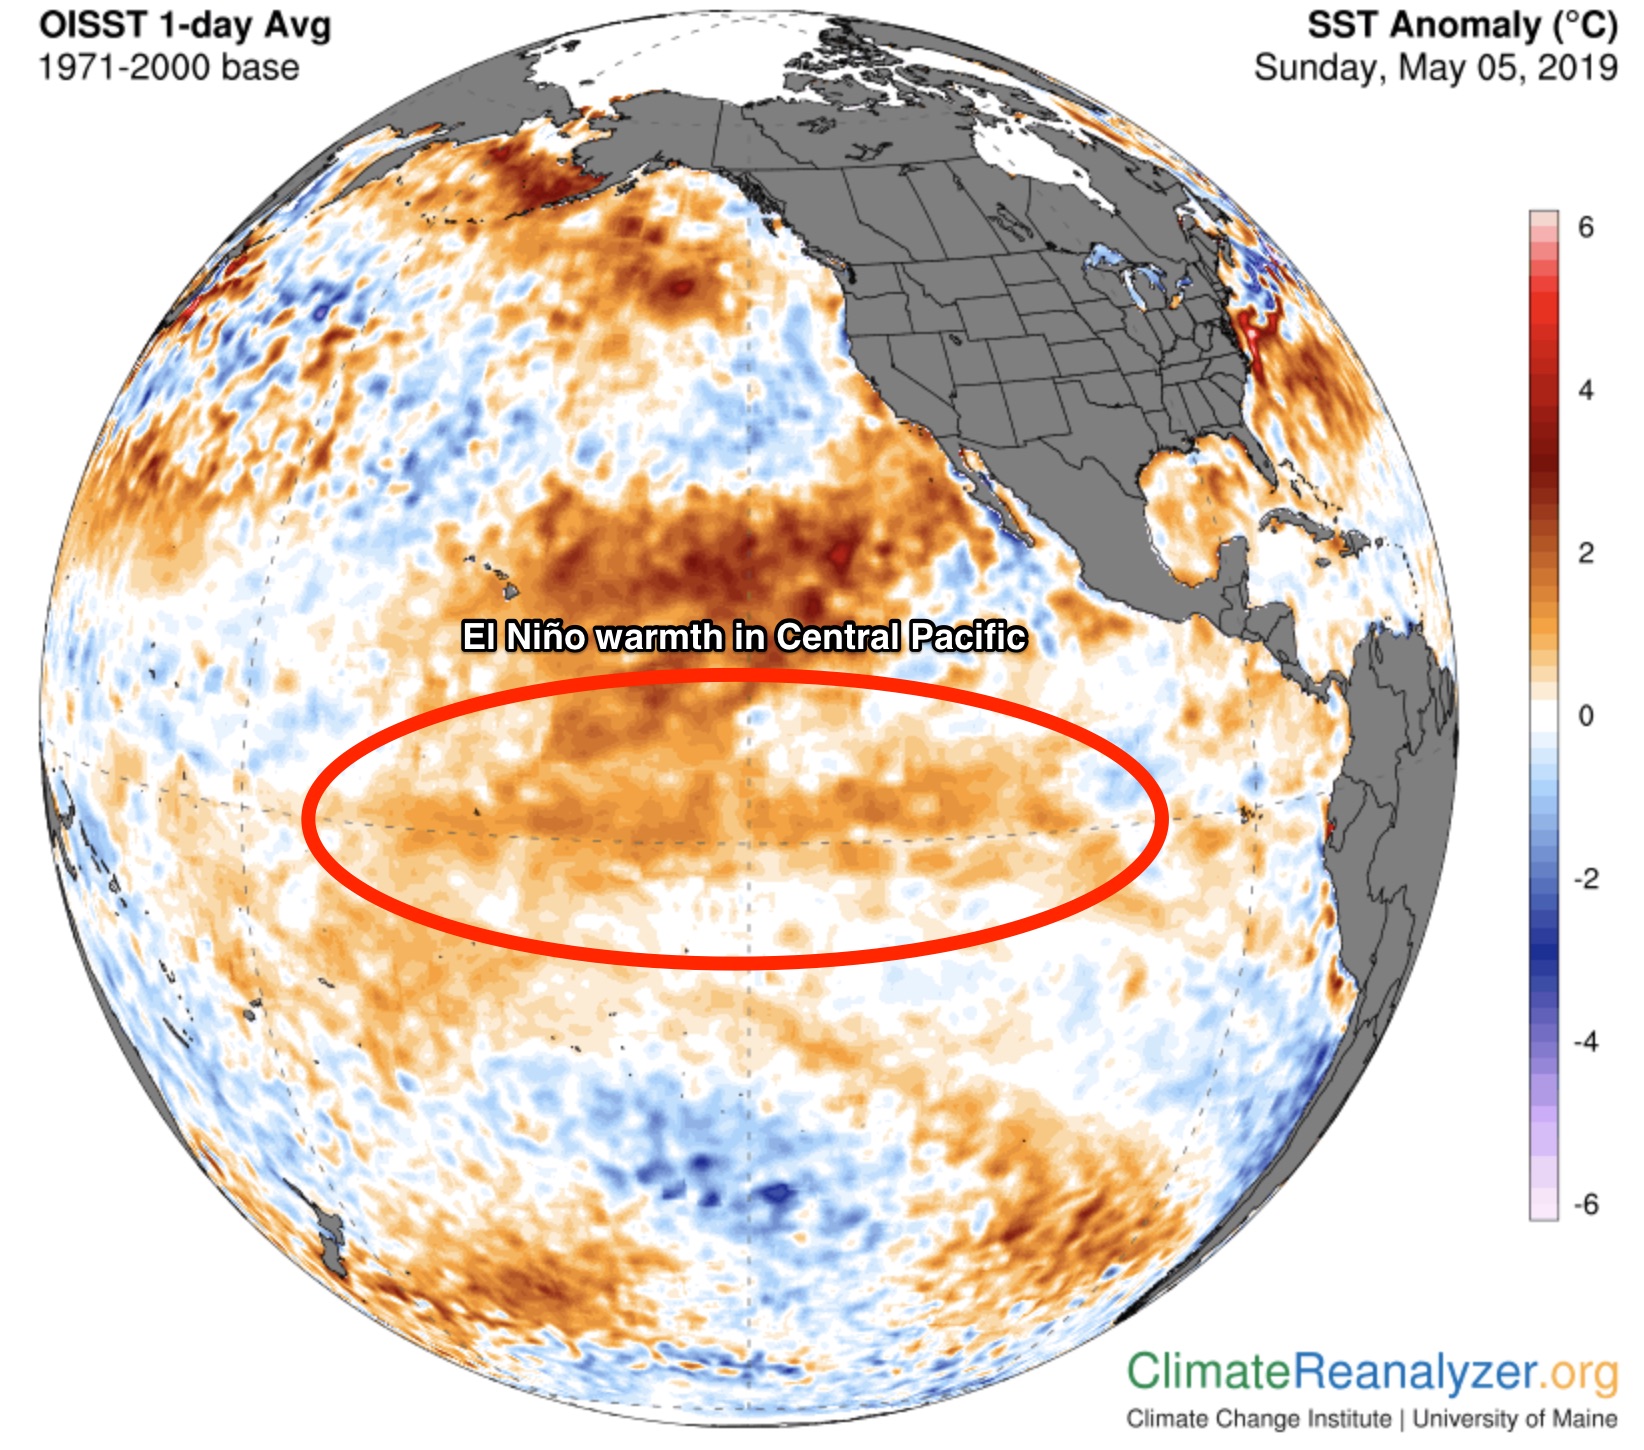 New Study Reveals "Extraordinary Change" in El Niño Possibly Linked to